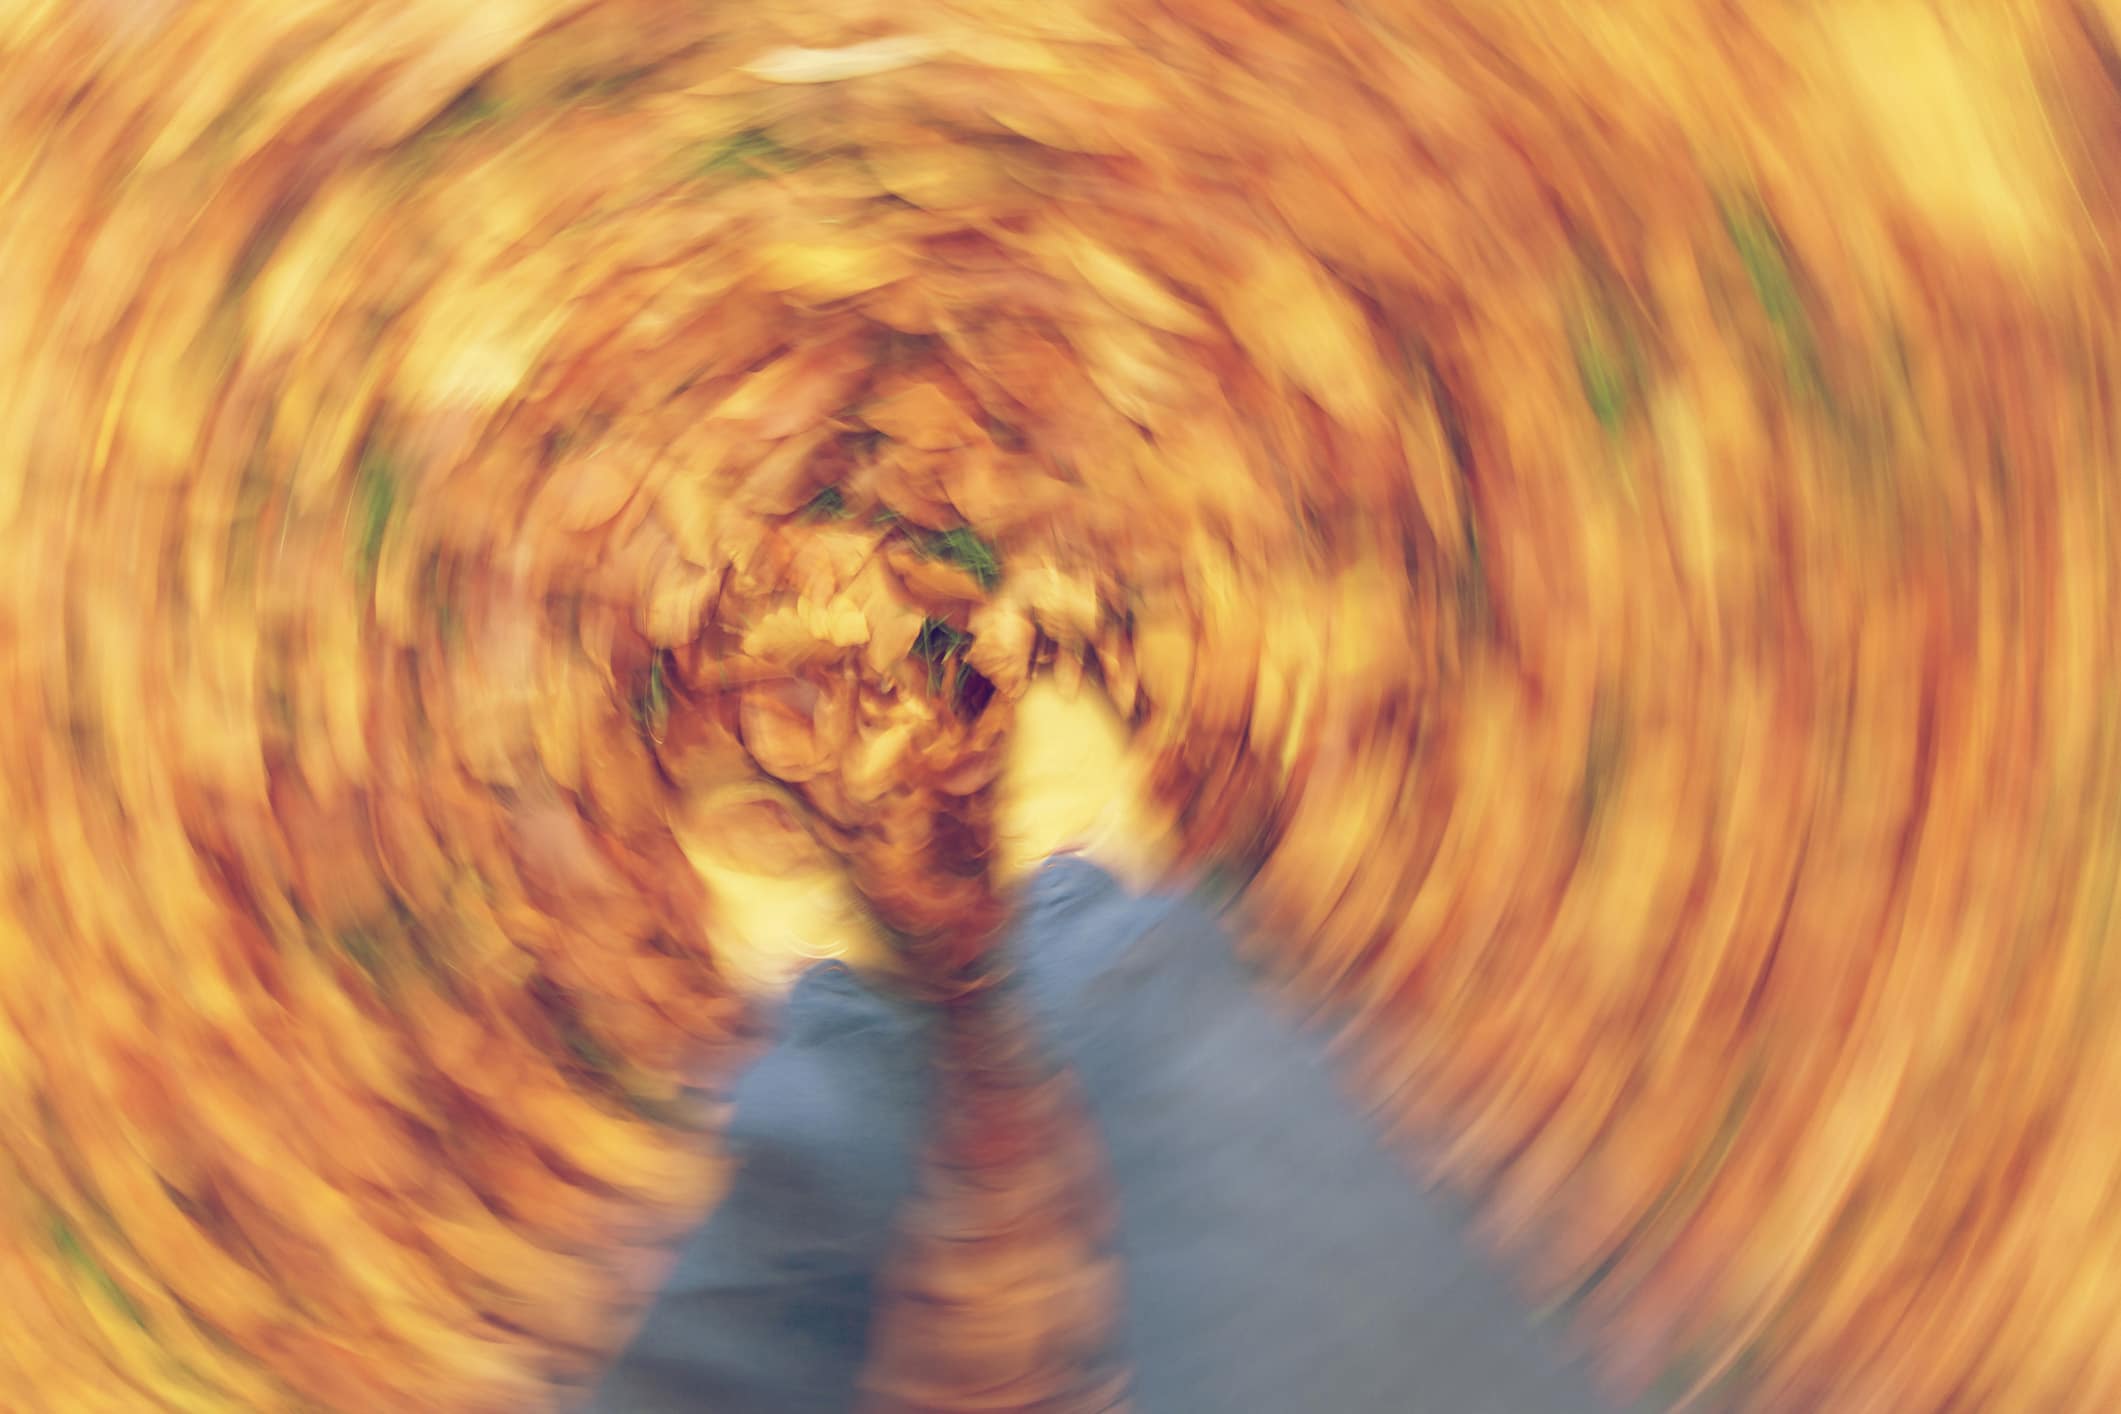 Motion blurred photograph of man or woman's feet walking through golden Fall or Autumn leaves